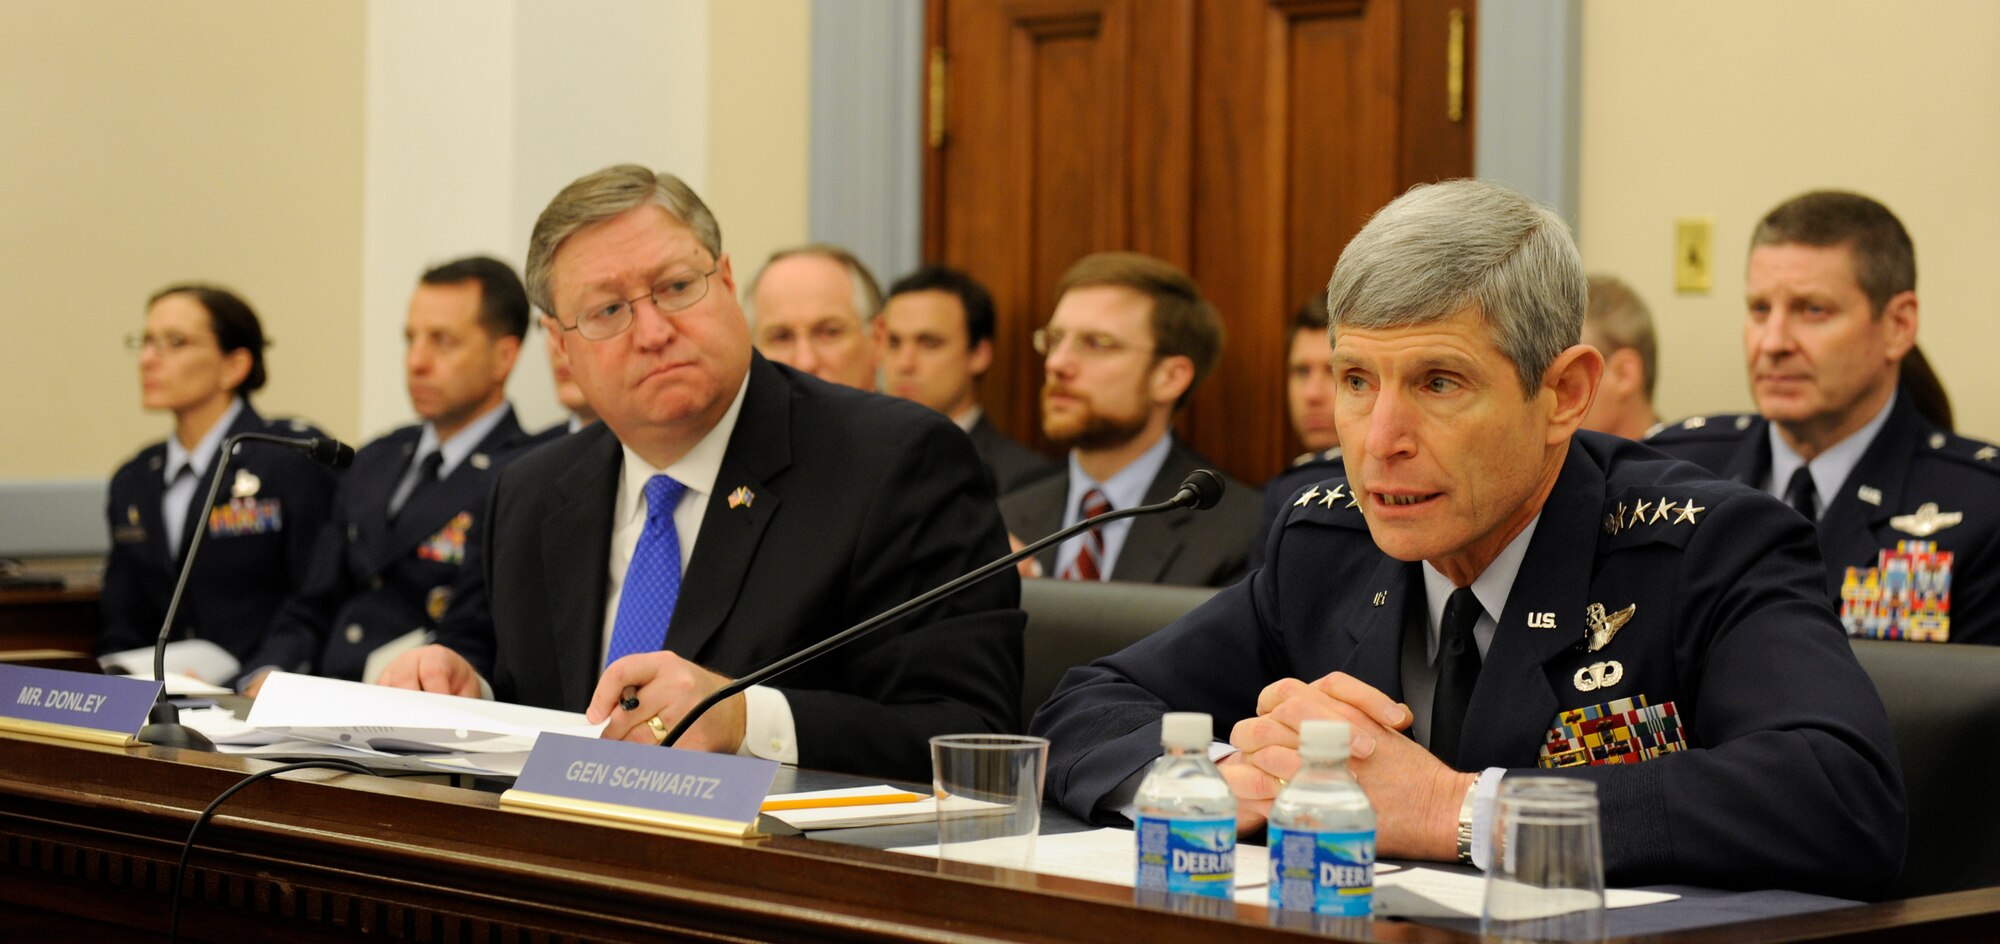 Air Force Chief of Staff Gen. Norton Schwartz provides his opening statement to the House Appropriations Subcommittee on Defense March 10, 2010, at the U.S. Capitol, with Secretary of the Air Force Michael Donley.  The hearing allowed Secretary Donley and General Schwartz the opportunity to outline the Air Force's FY2011 budget request and to address questions raised by committee members.  Topics included service core functions such as nuclear deterrence, air and space superiority, cyberspace, global precision attack and rapid global mobility.  (U.S. Air Force photo/Scott M. Ash)